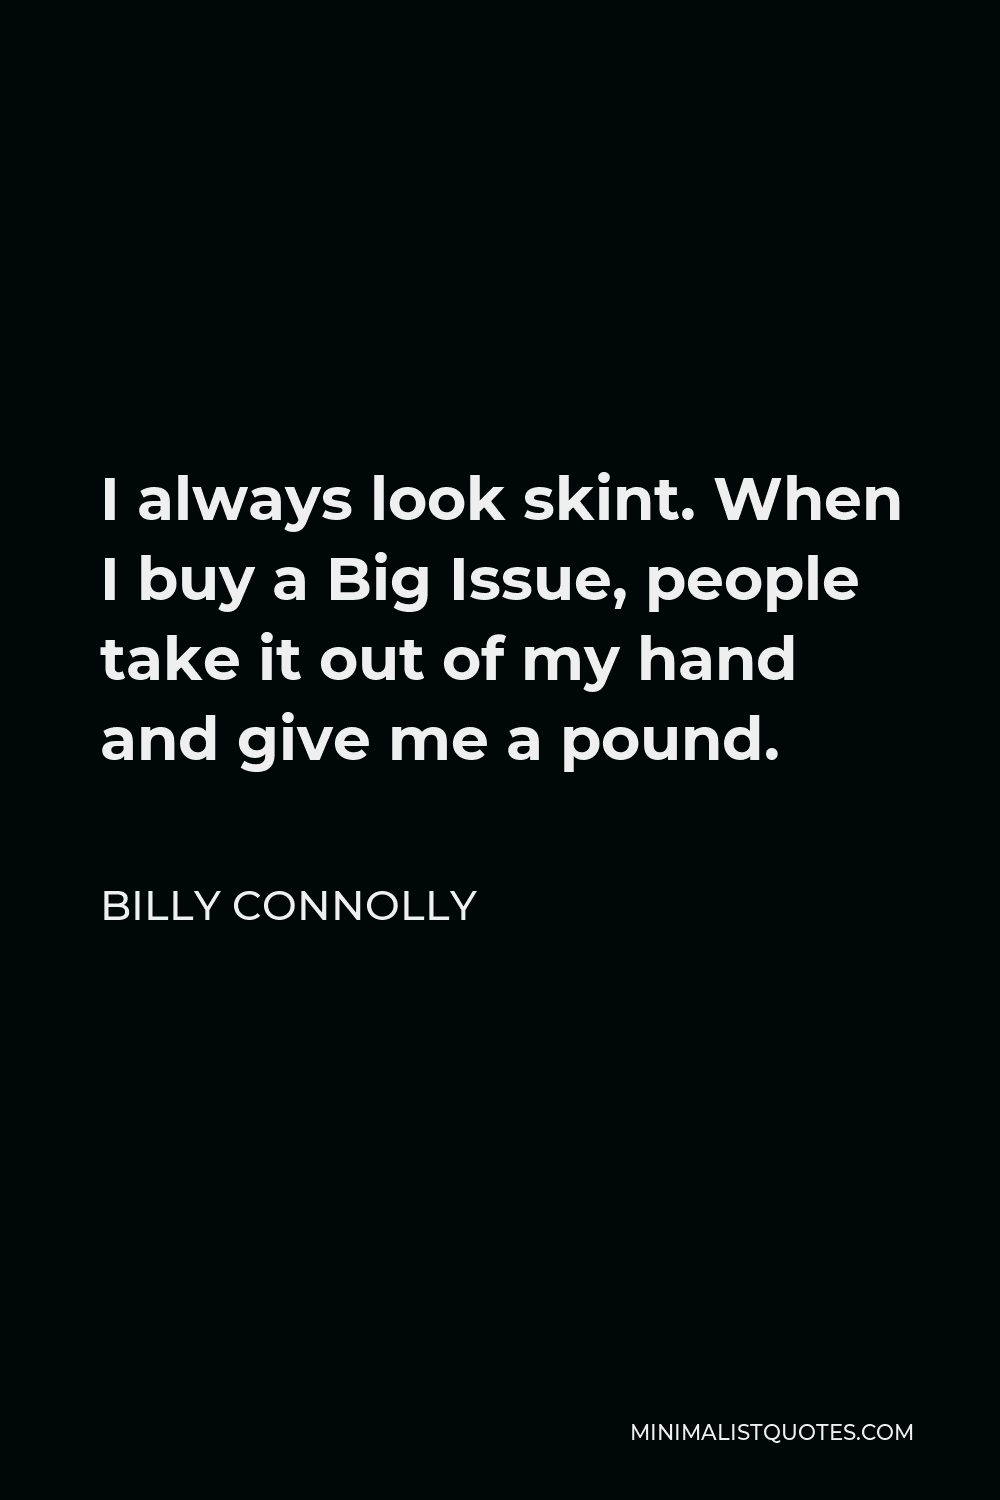 Billy Connolly Quote - I always look skint. When I buy a Big Issue, people take it out of my hand and give me a pound.